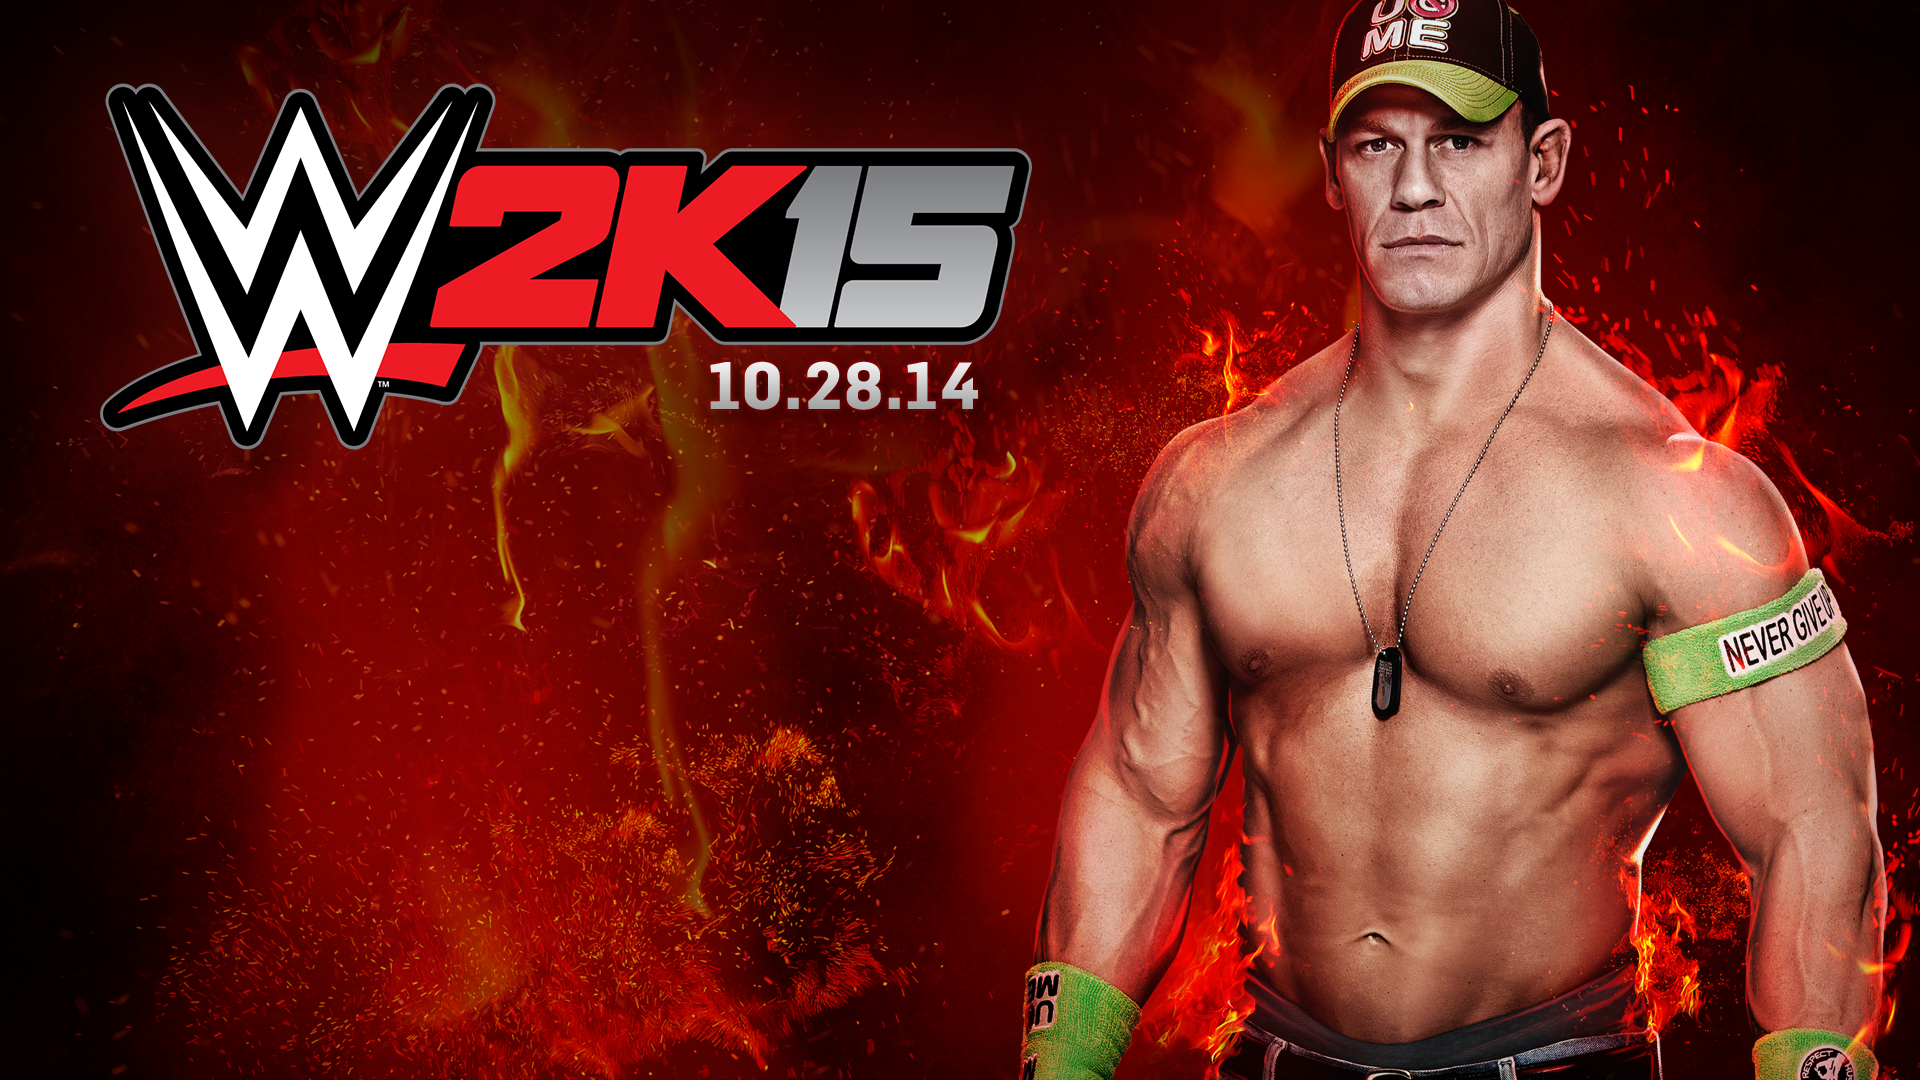 WWE announces its newest WWE Champion for their cover on WWE 2K15